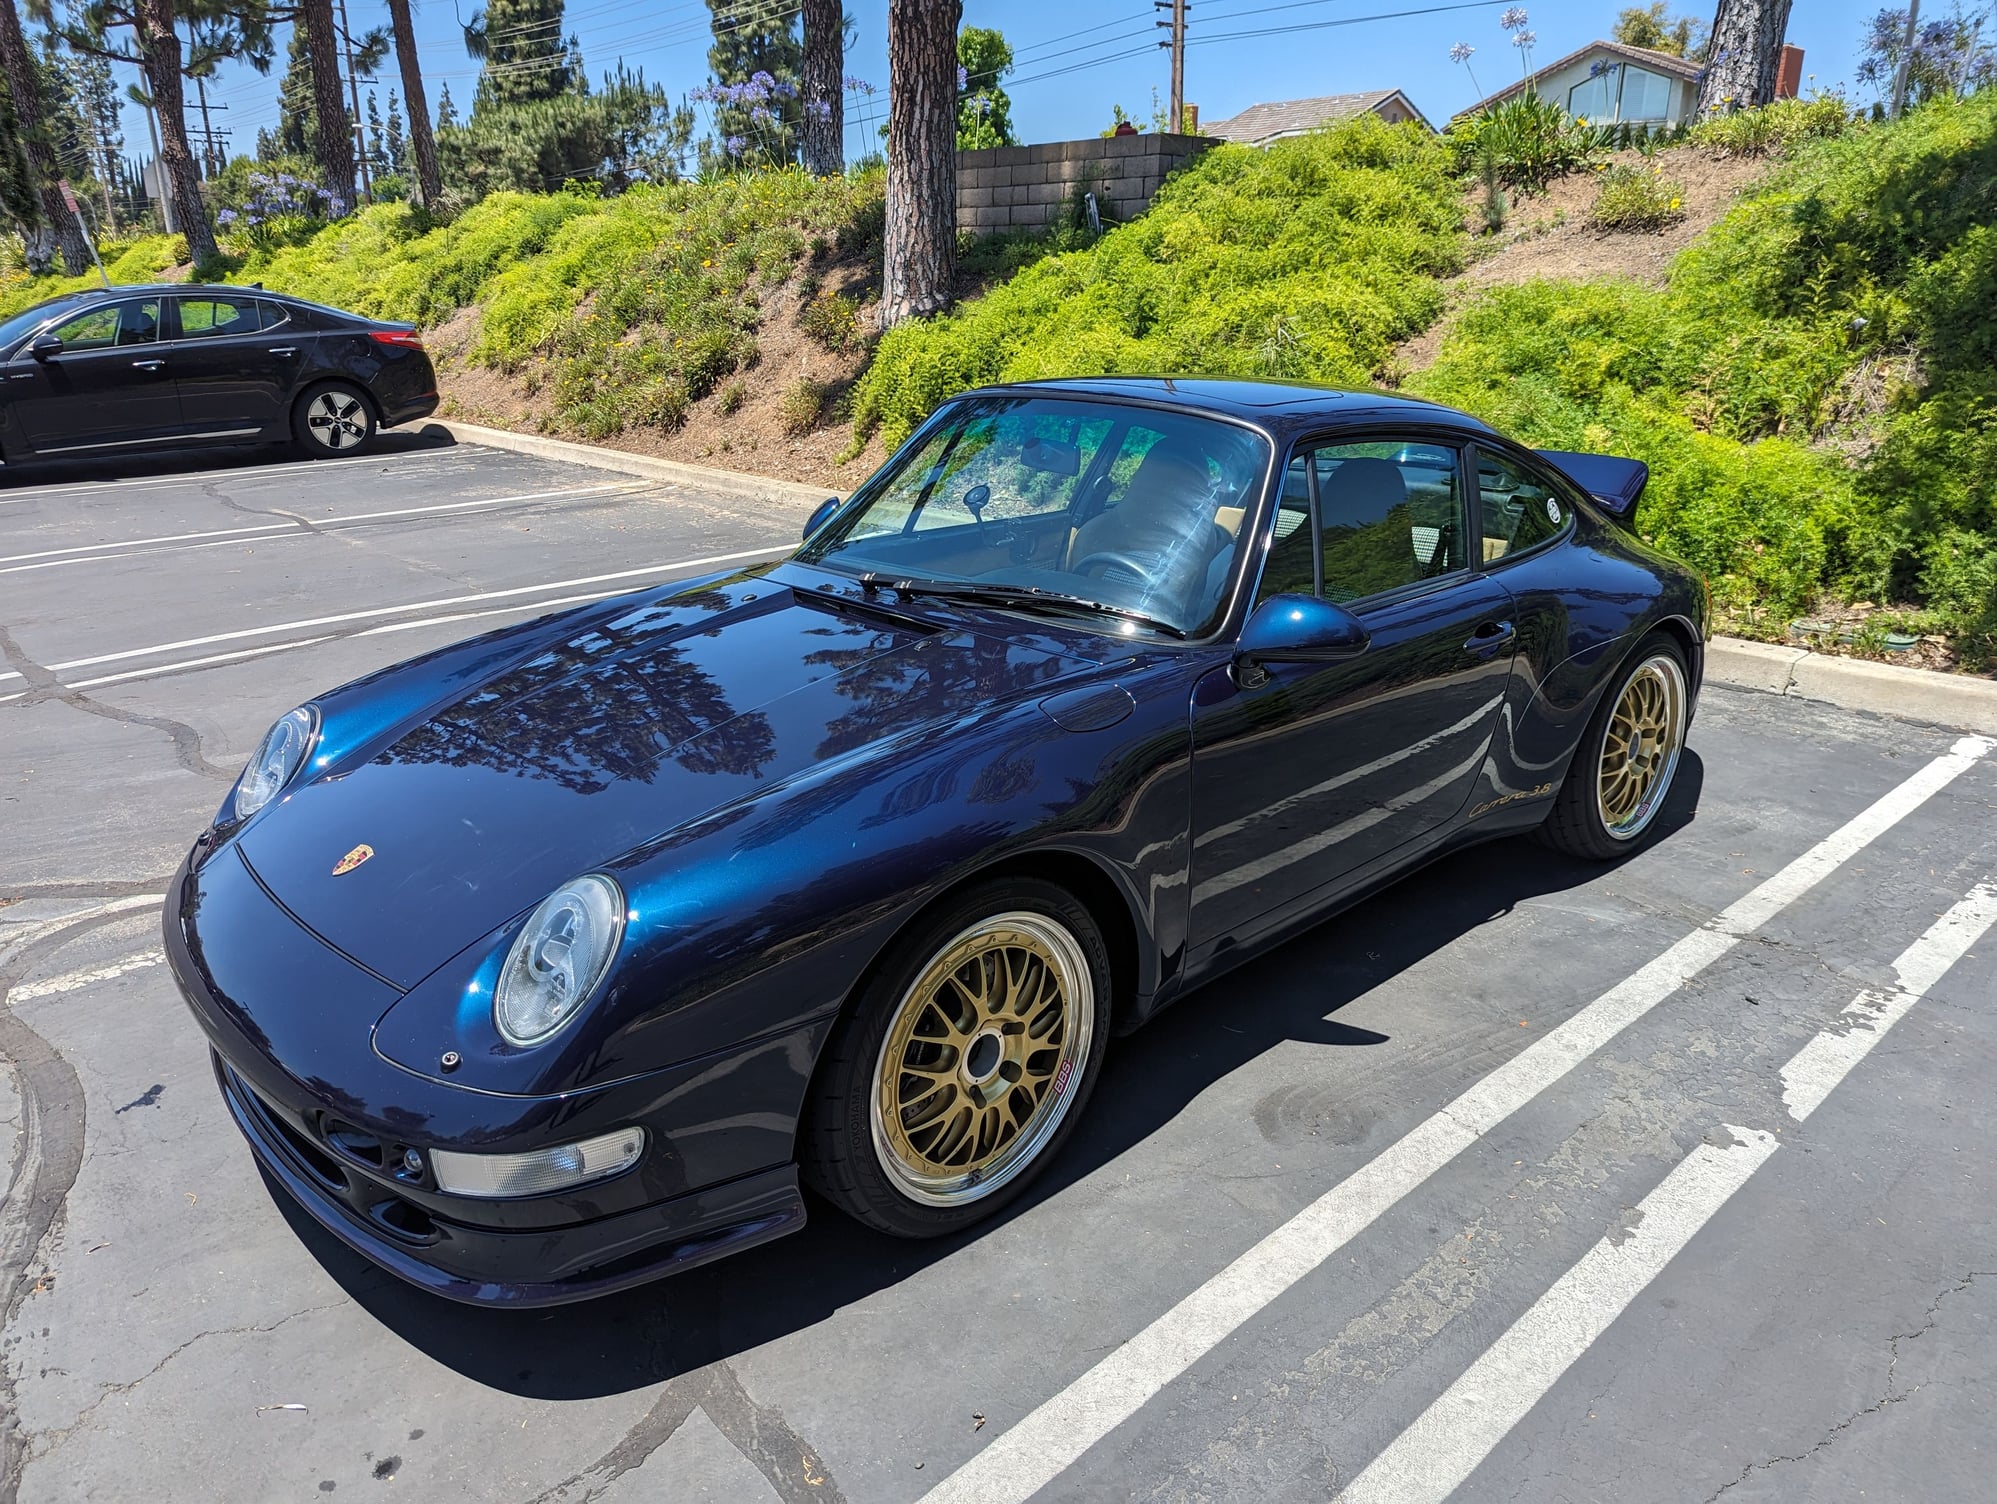 1997 Porsche 911 - 1997 Ocean Blue 993 C2 with 3.8 Motor & Tan Hounds Tooth Interior - Used - VIN WP0AA299VS322242 - 34,250 Miles - 6 cyl - 2WD - Manual - Coupe - Blue - Brea, CA 92821, United States